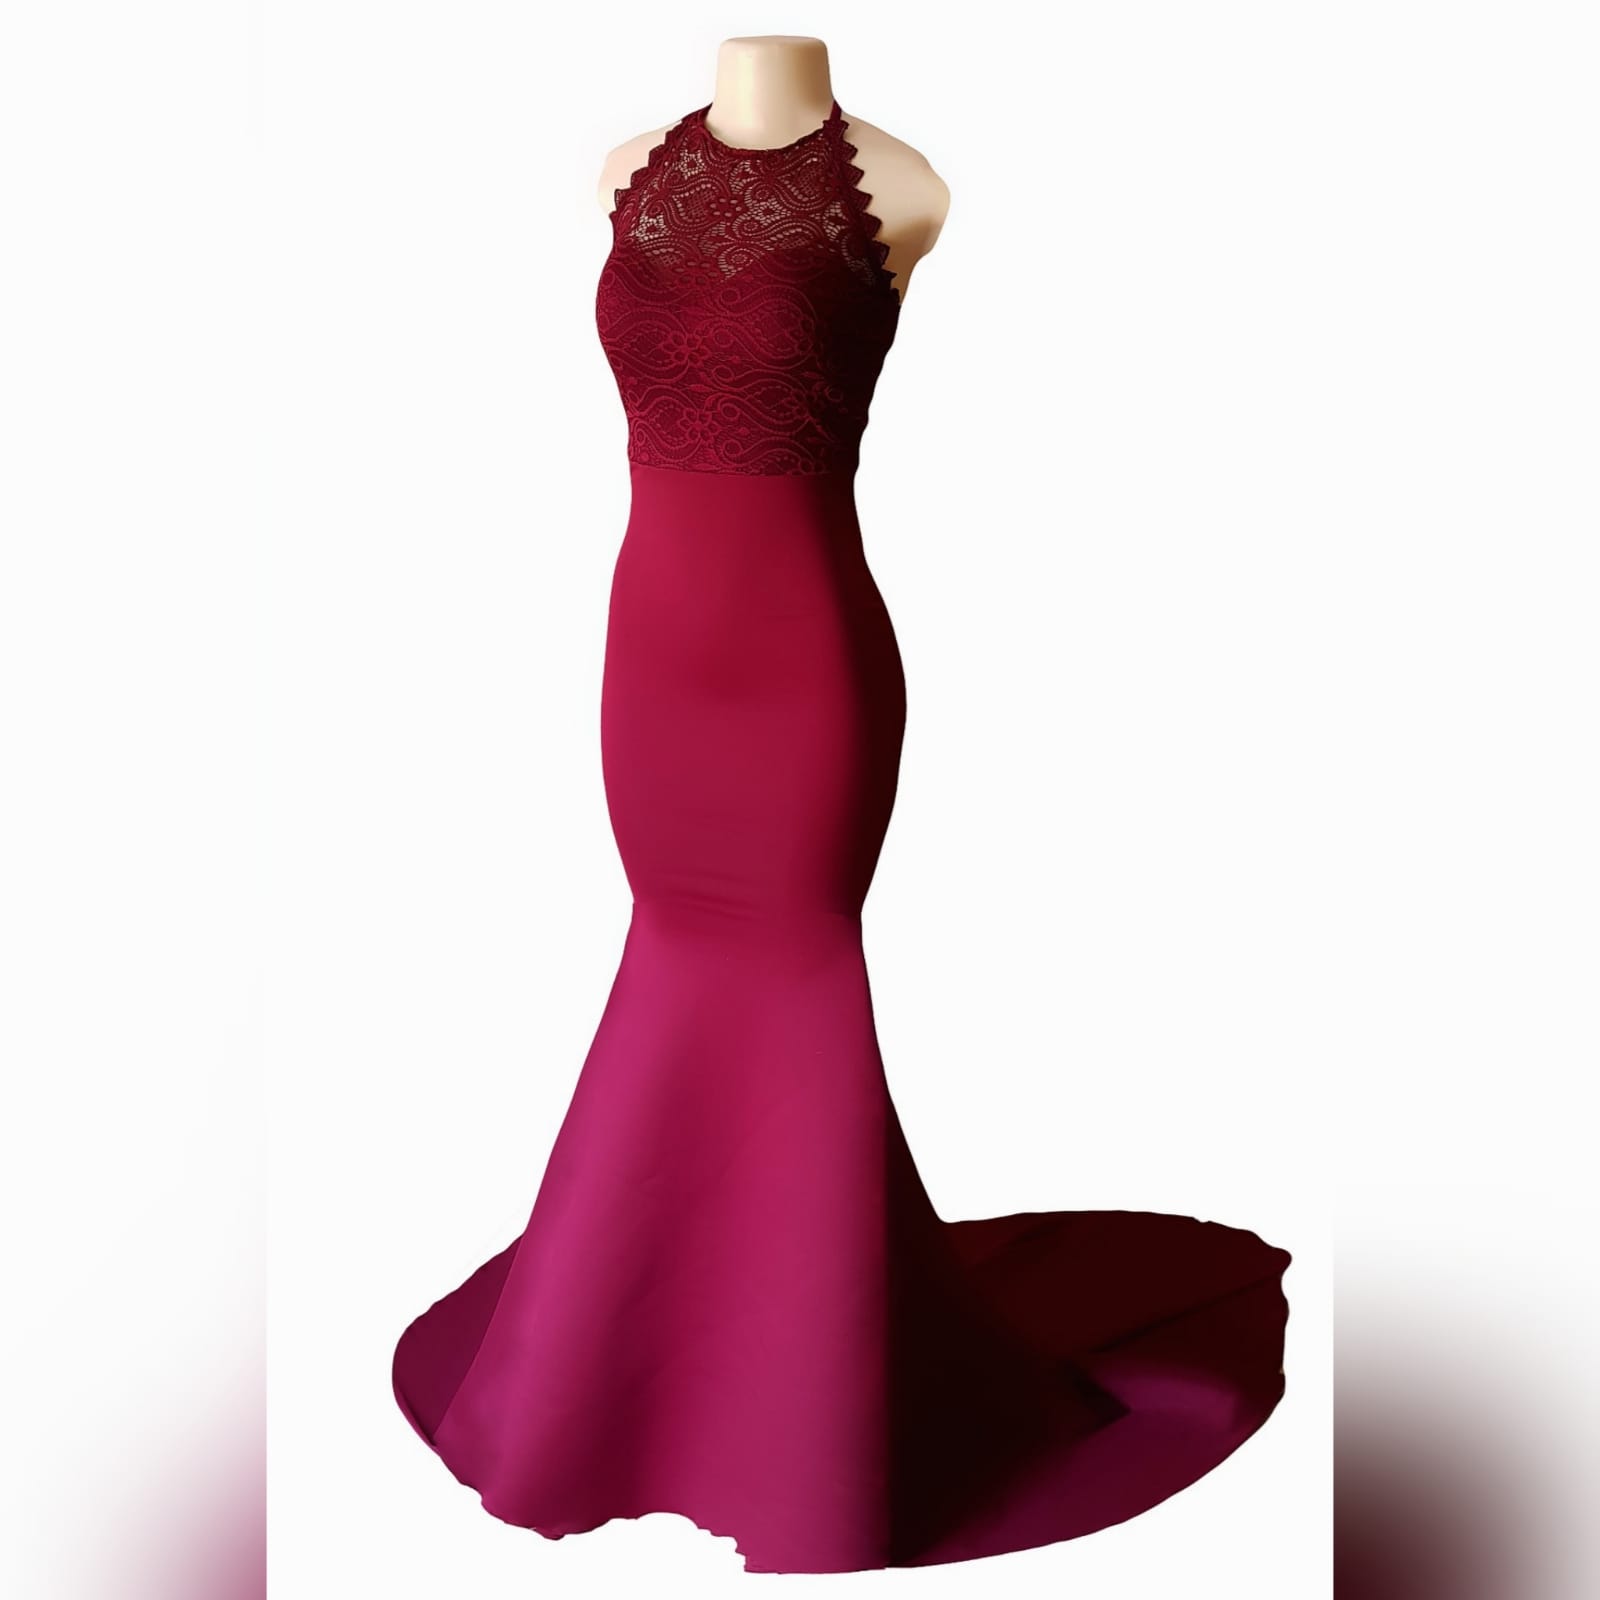 Burgundy soft mermaid gorgeous evening dress 13 this gorgeous evening dress was created for my client in south africa to celebrate her special occasion. A burgundy soft mermaid prom dress with a lace bodice, a sheer lace neckline and dramatic train.